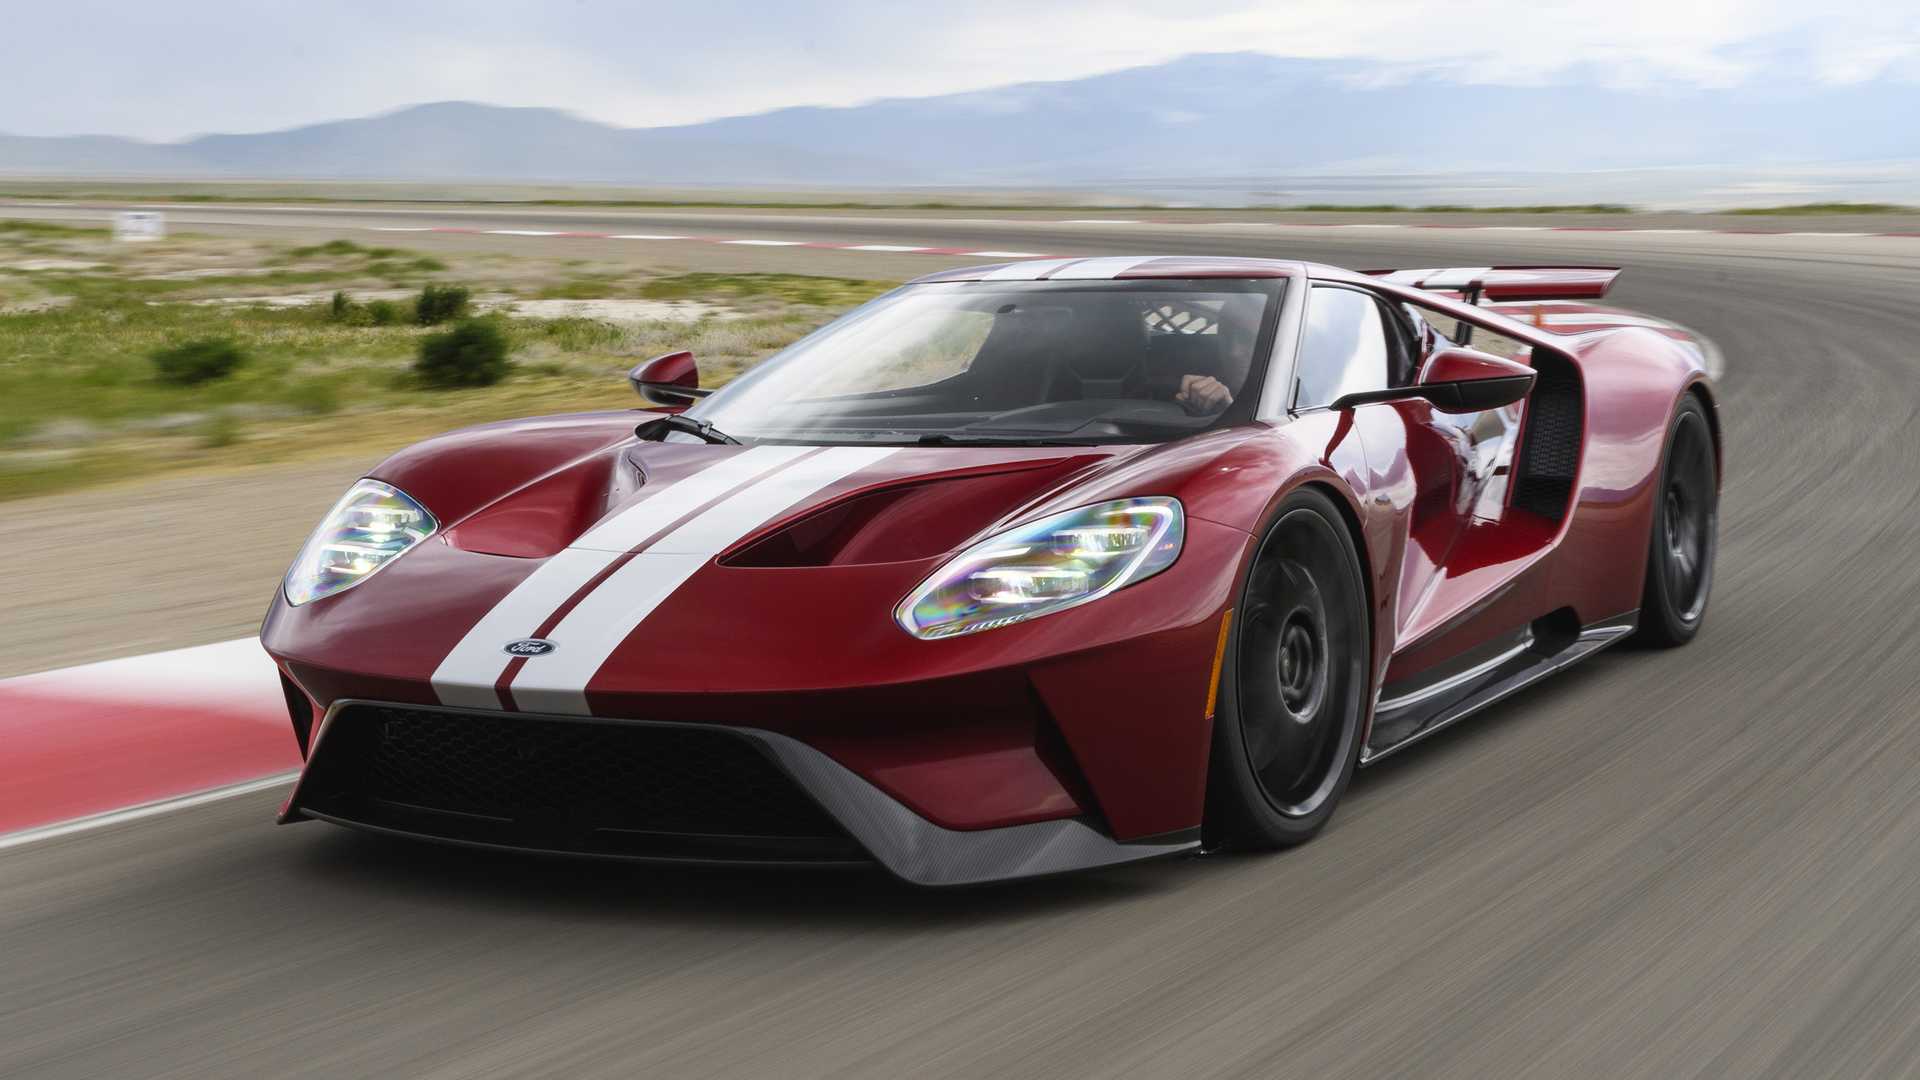 2017 Ford GT Sells For $1.815M At Auction